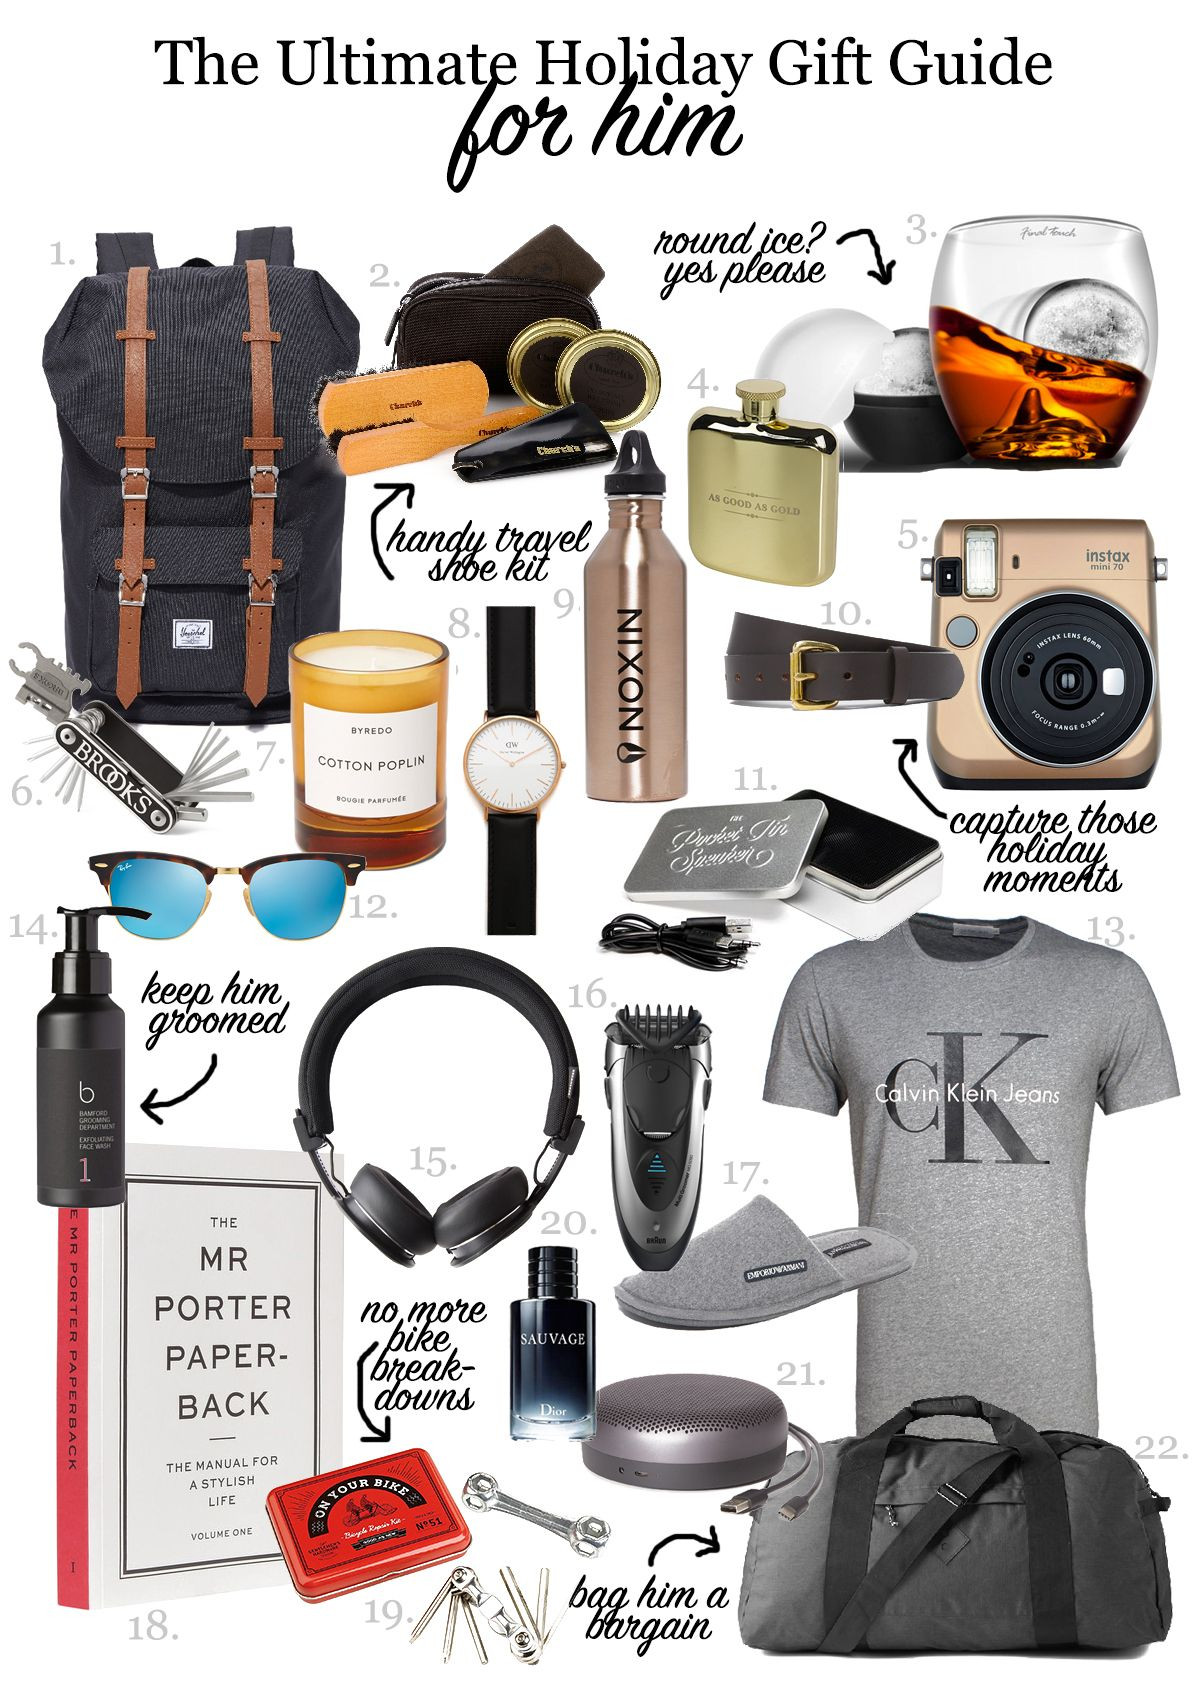 Great Birthday Gifts For Him
 22 GIFT IDEAS FOR HIM THIS HOLIDAY SEASON